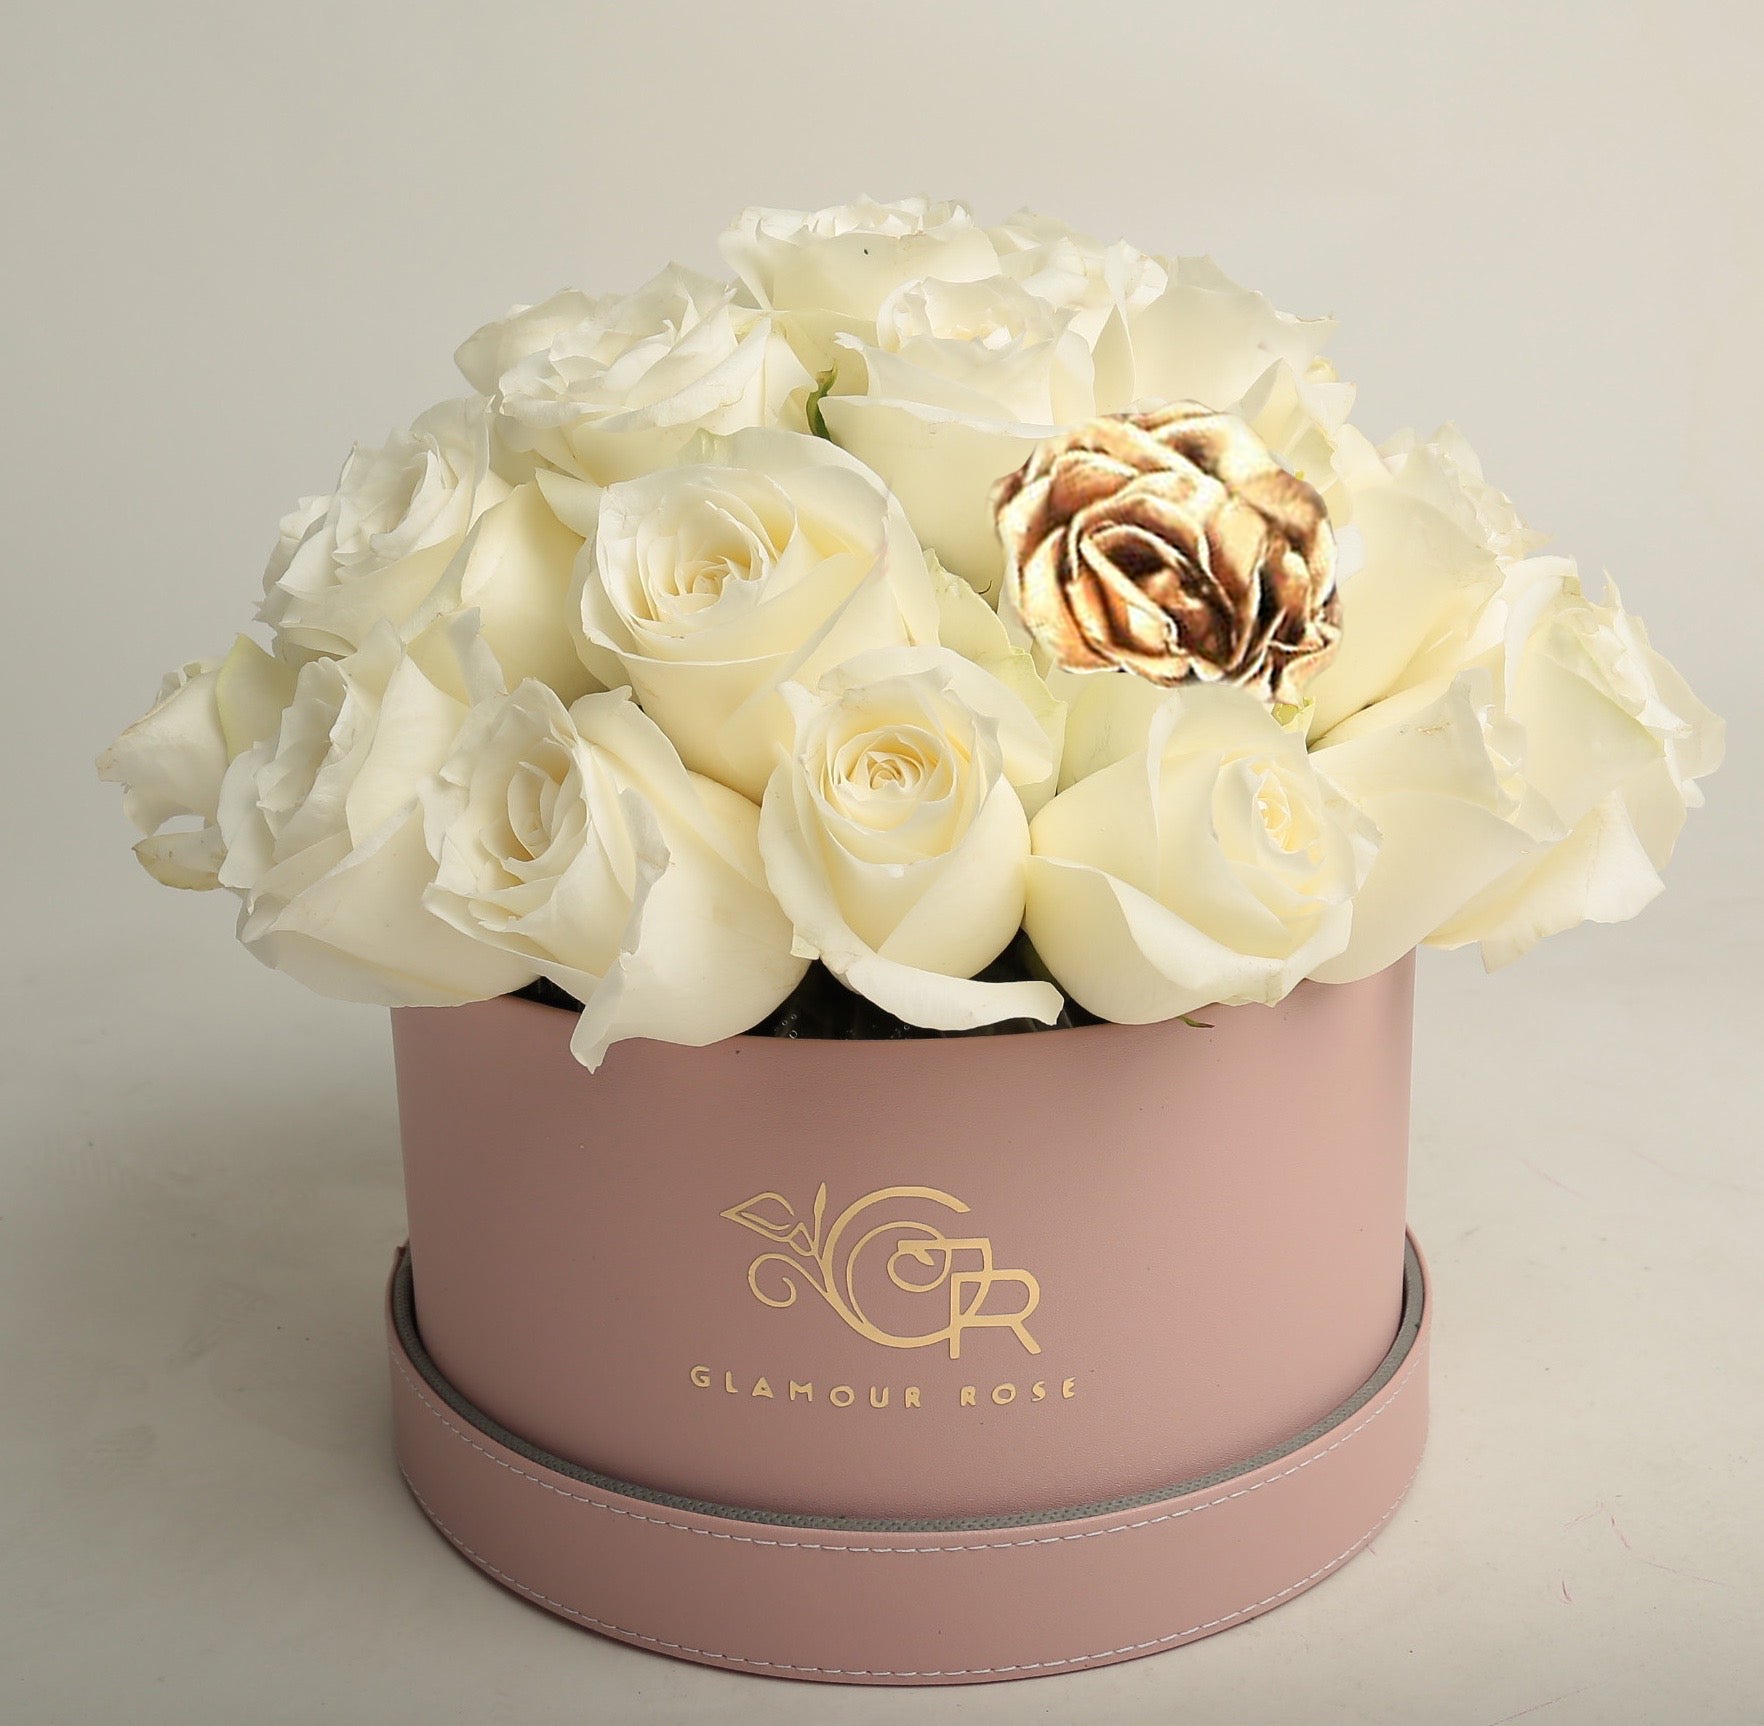 Pure Bliss - Glamour Rose